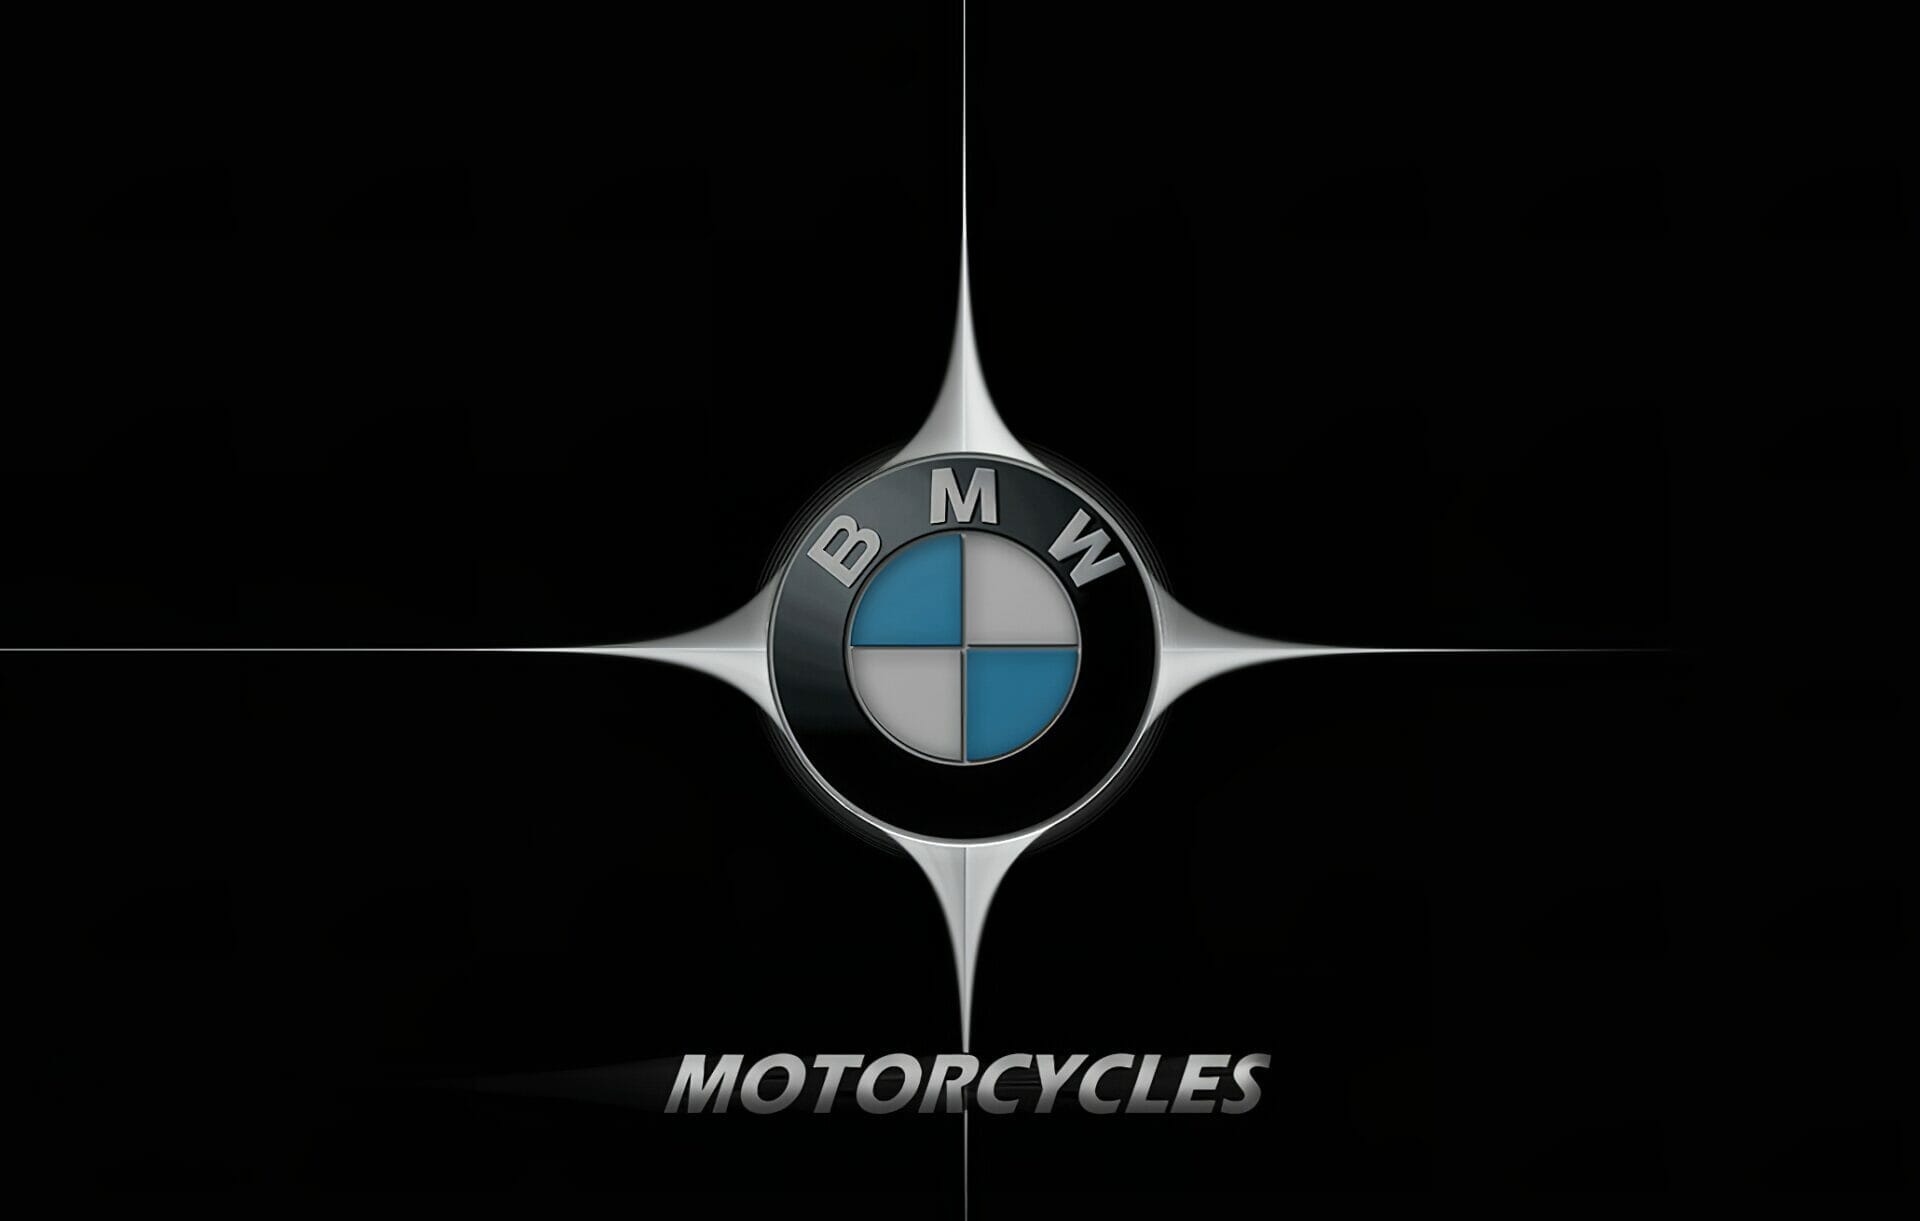 BMW motorcycles: Temporary halt to sales in North America